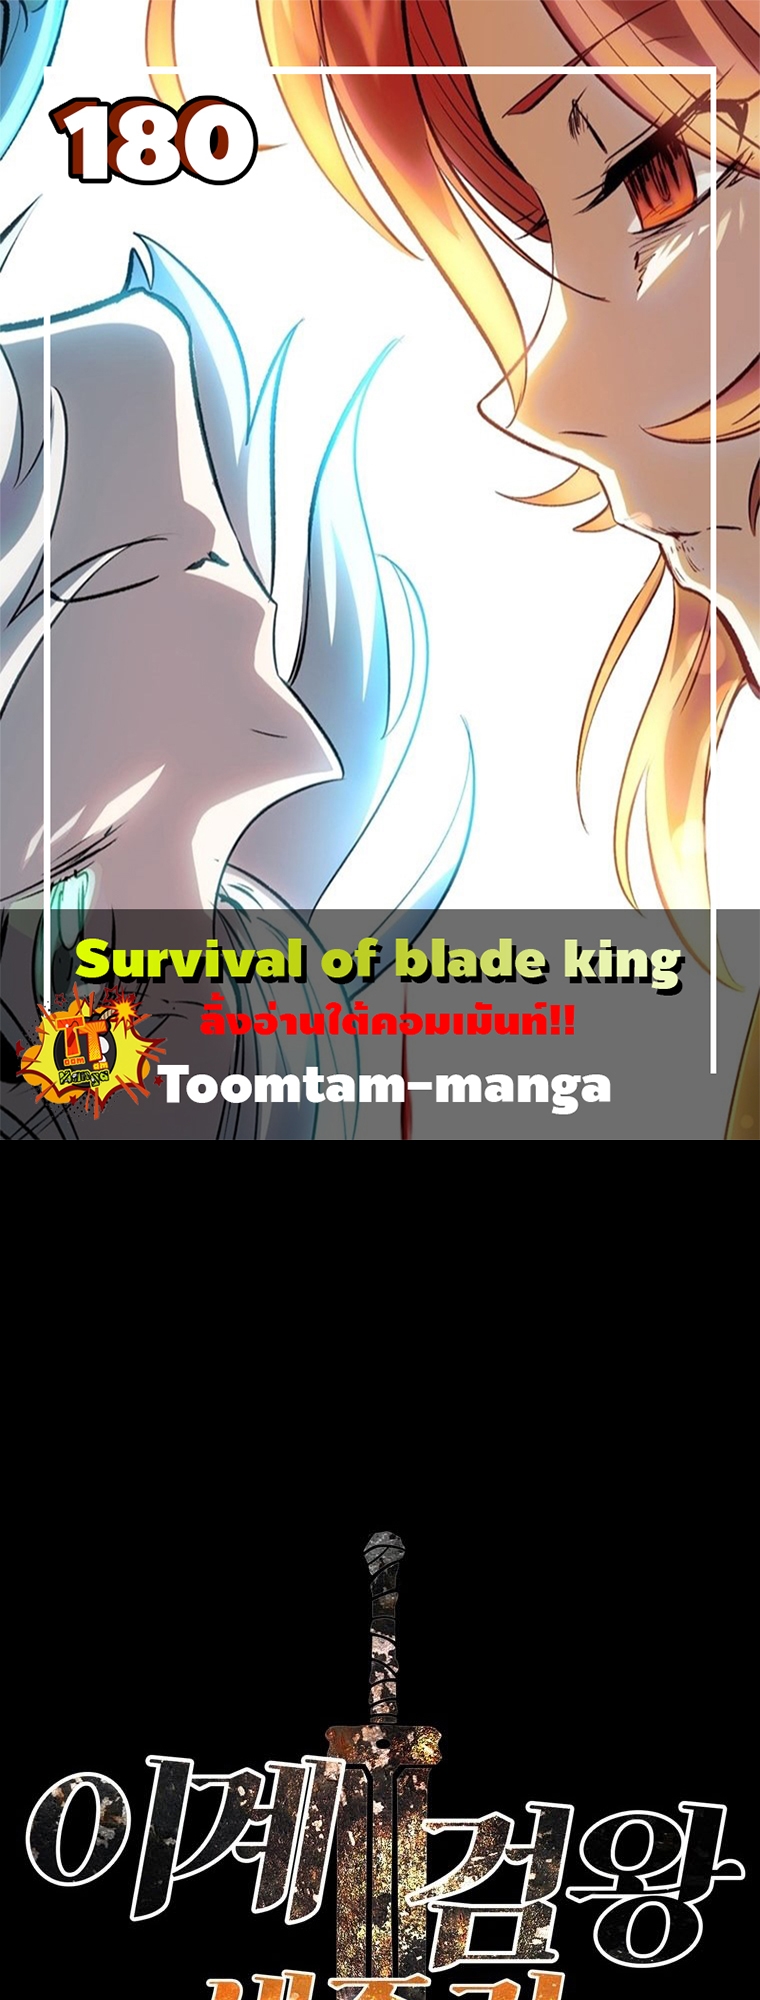 Survival of blade king 180 18 8 25660001